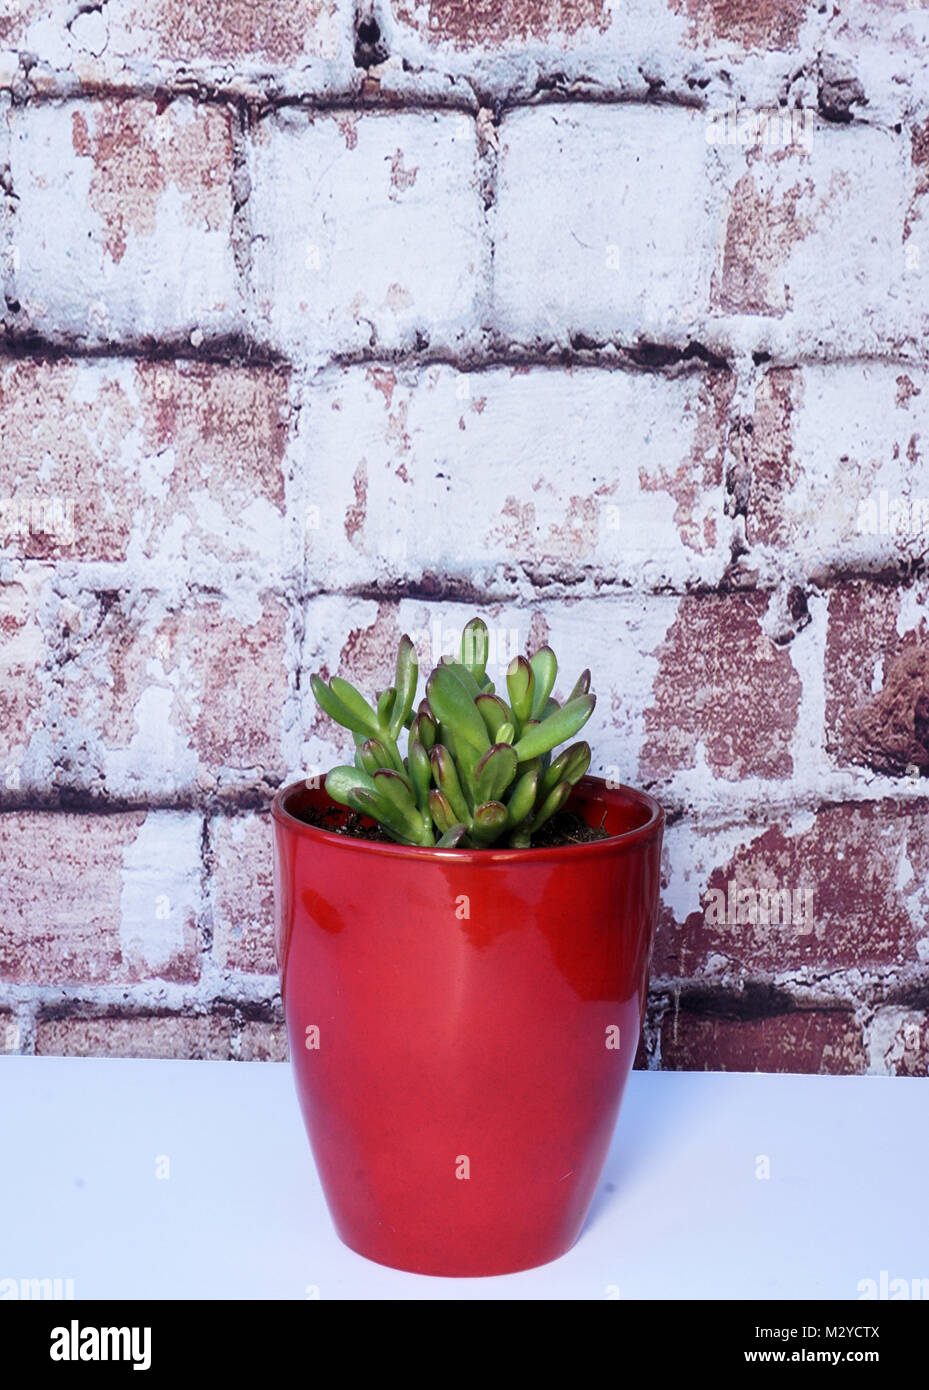 Red tipped succulent in a red vase against brick background. Stock Photo